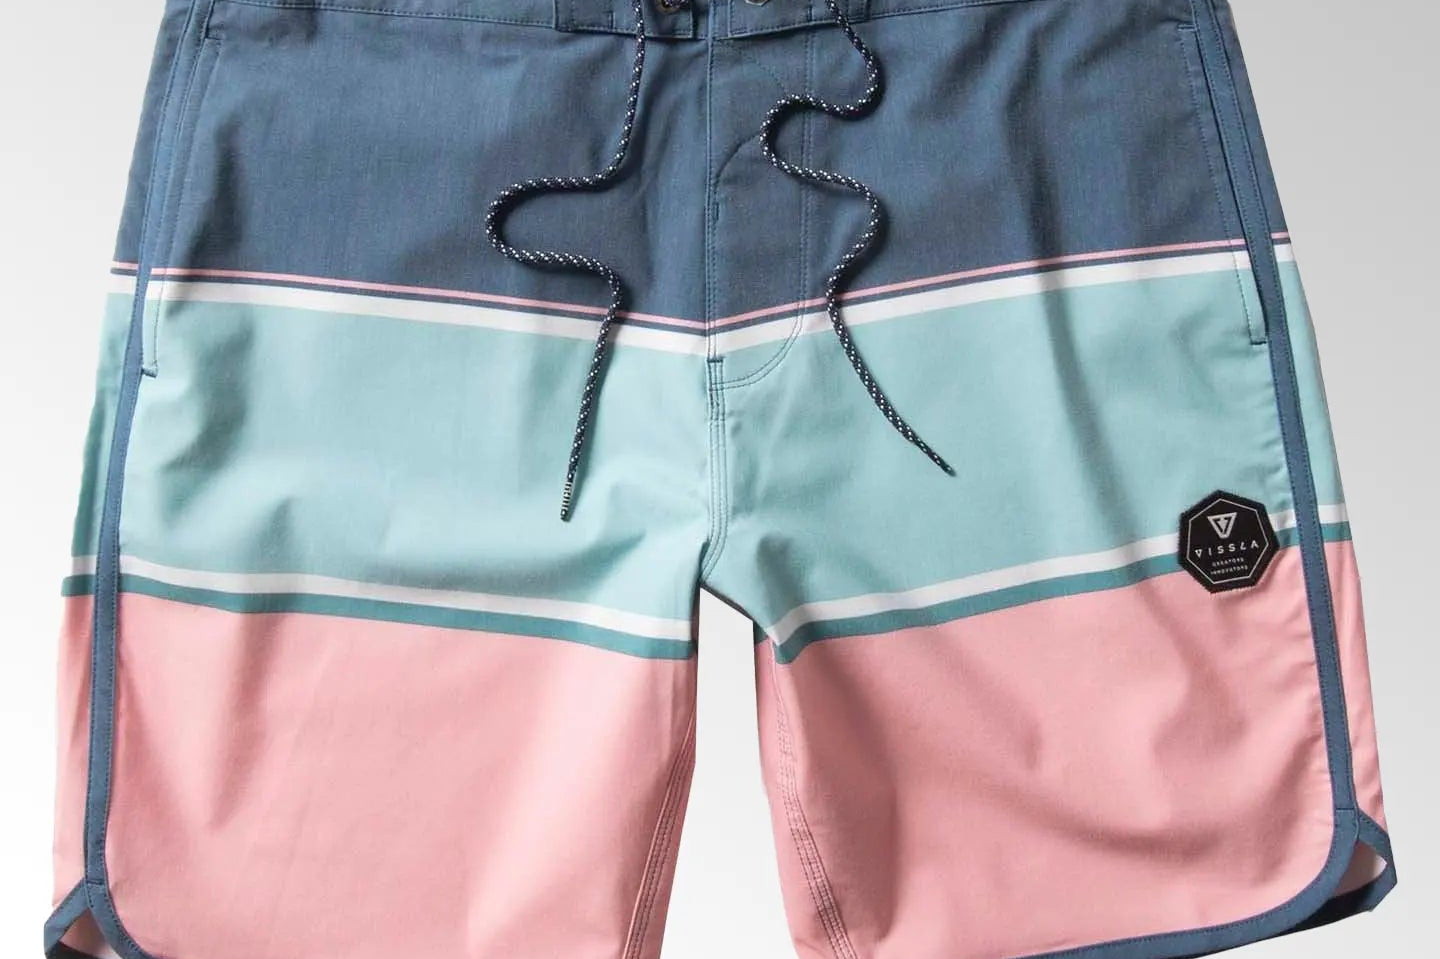 The Point 19.5" Boardshort Pacific Blue - The Good Chic